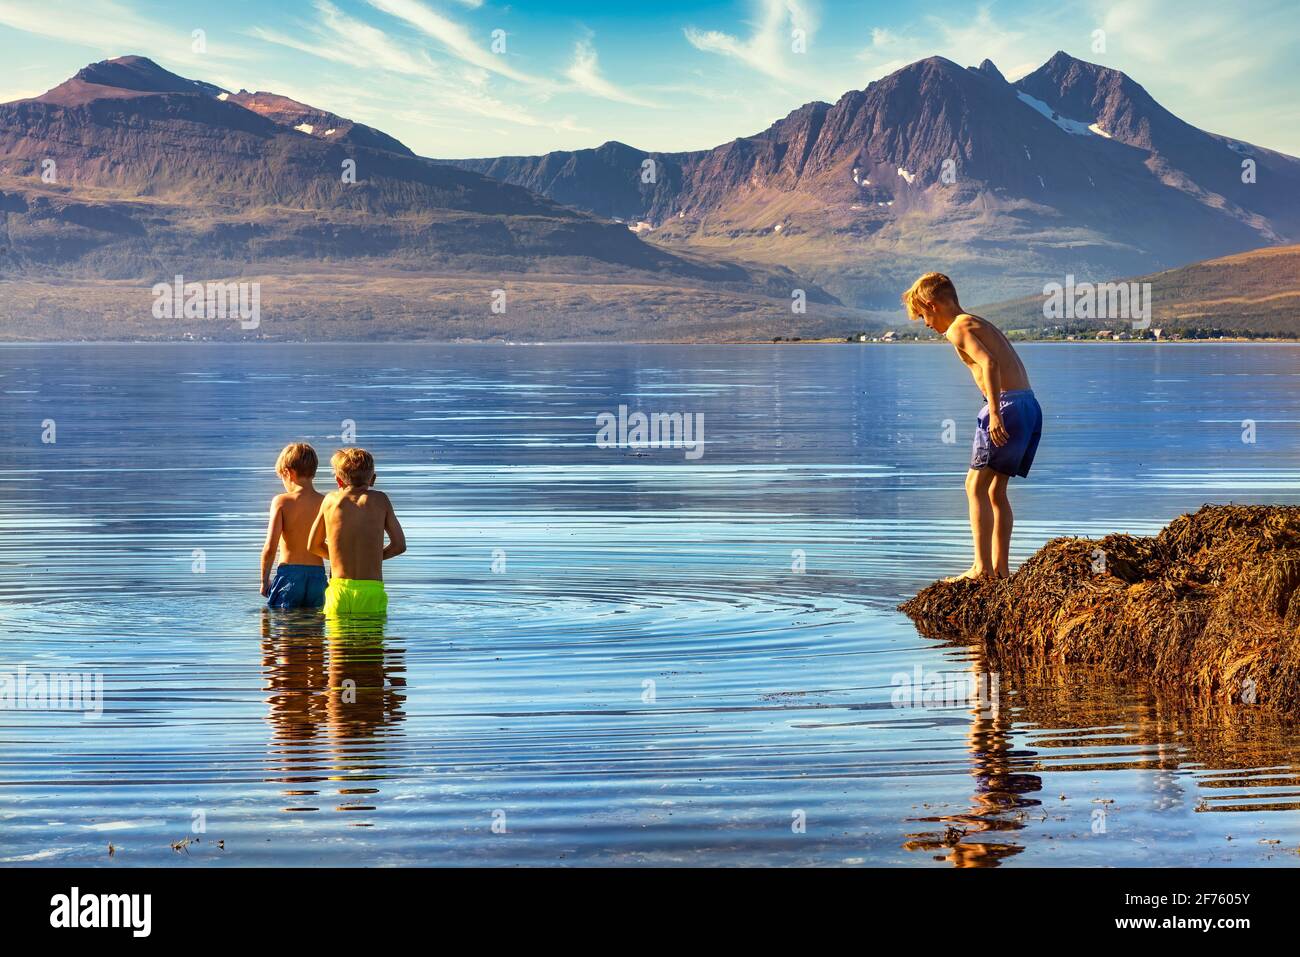 Tromso, Norway - August 18, 2016: Two boys take a bath in the cold water of Tromso, 350 km north of the Arctic Circle Stock Photo